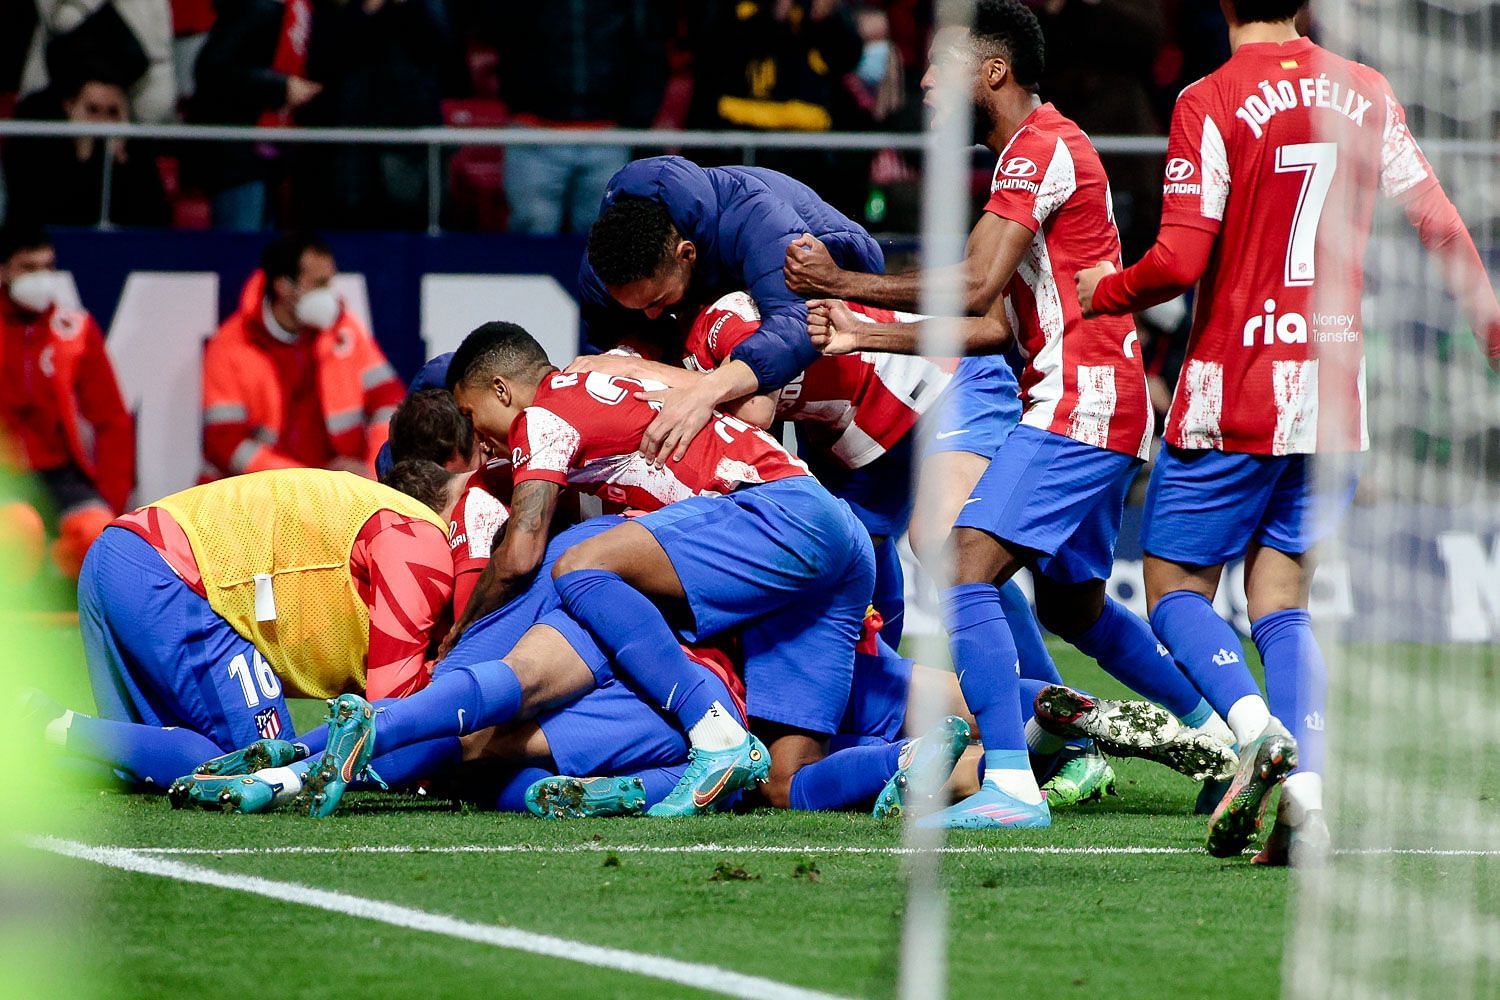 Atletico Madrid came from behind to beat Getafe in La Liga.